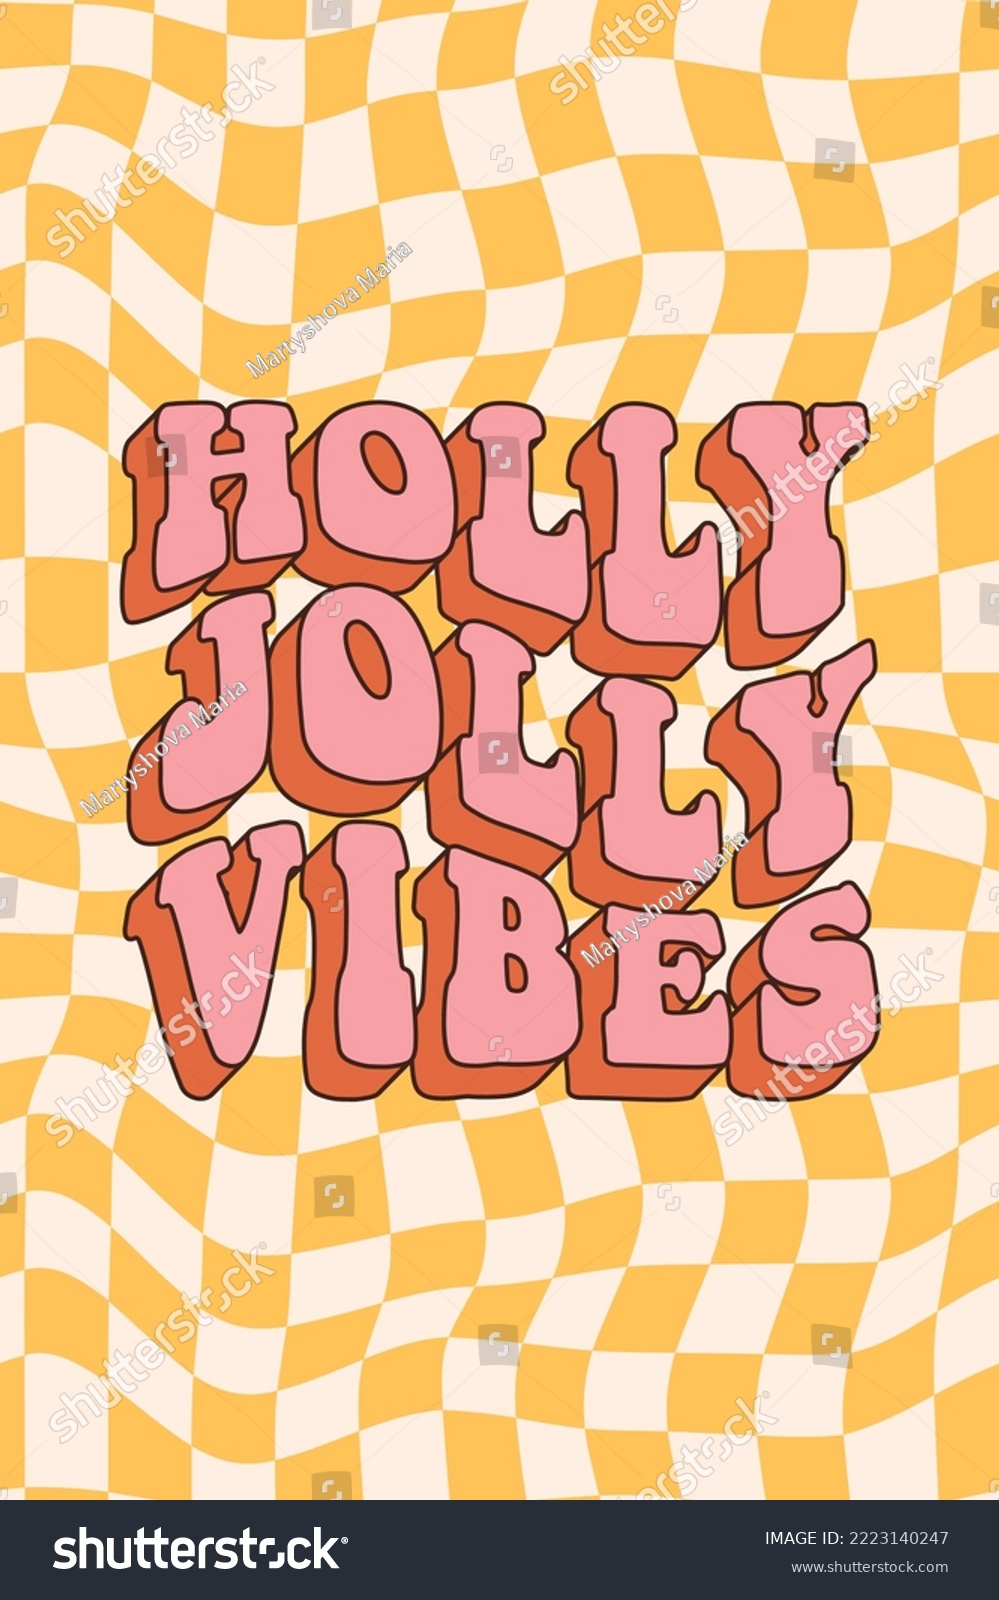 Groovy hippie Christmas. Holly jolly vibes, checkerboard in trendy retro cartoon style. Happy New year greeting card, poster, template, print, party invitation, background. #2223140247